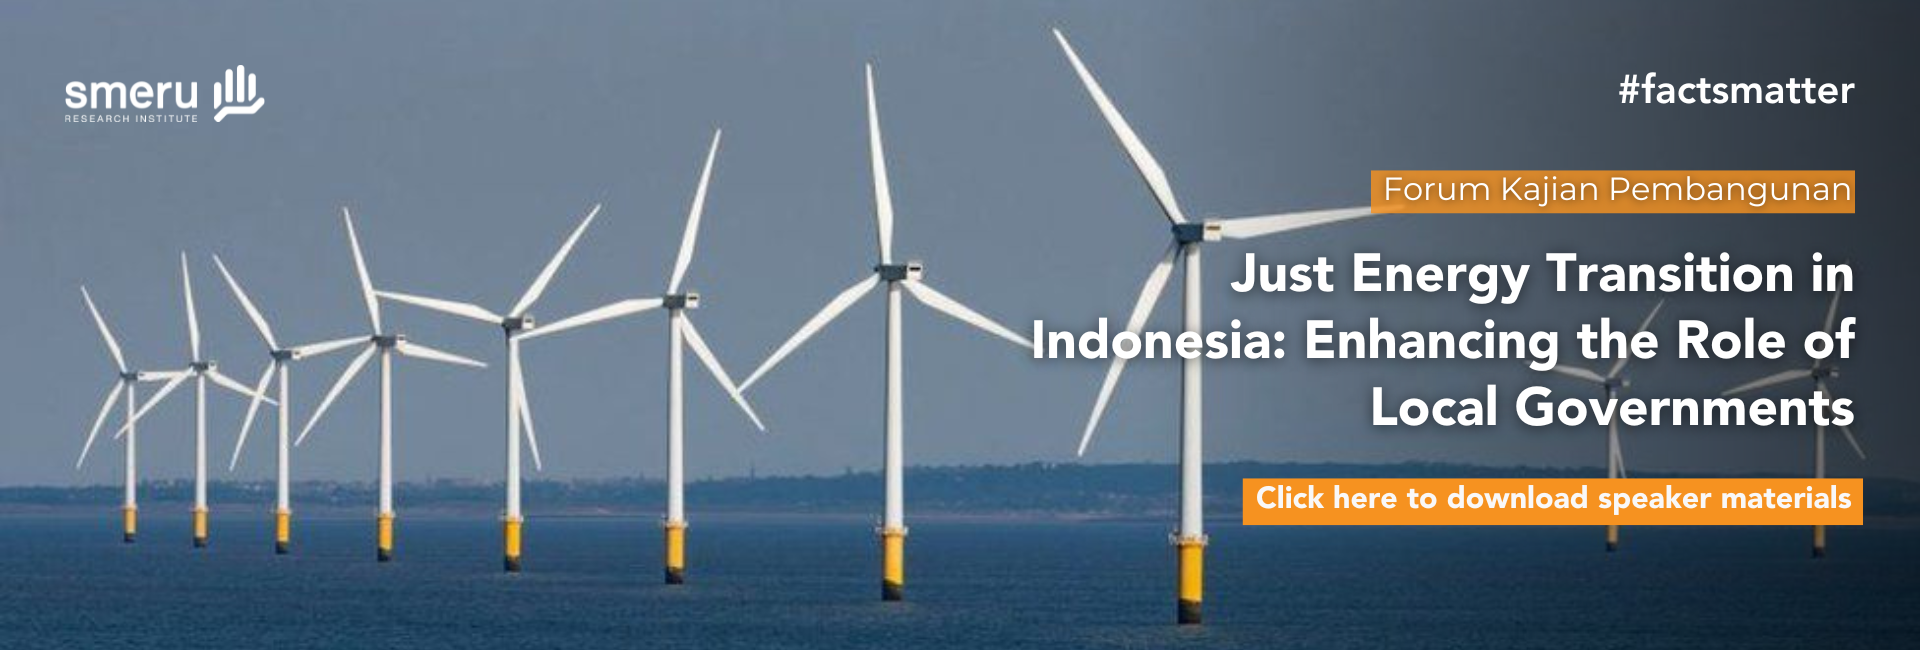 Just Energy Transition in Indonesia: Enhancing the Role of Local Governments